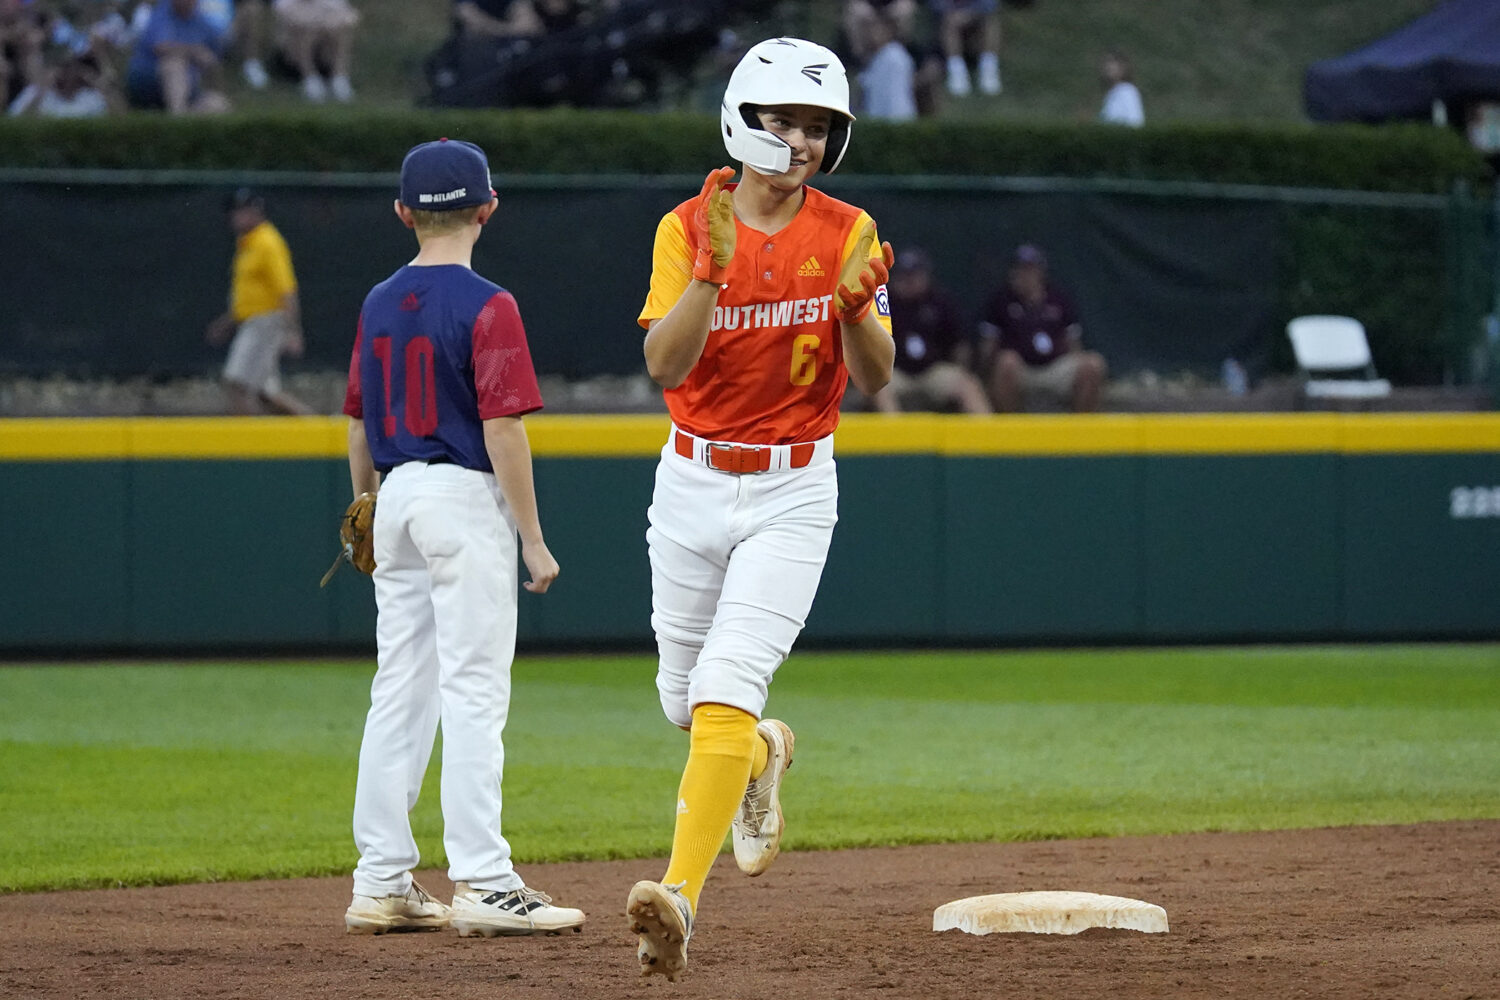 Pearland can advance to U.S. Final in Little League World Series